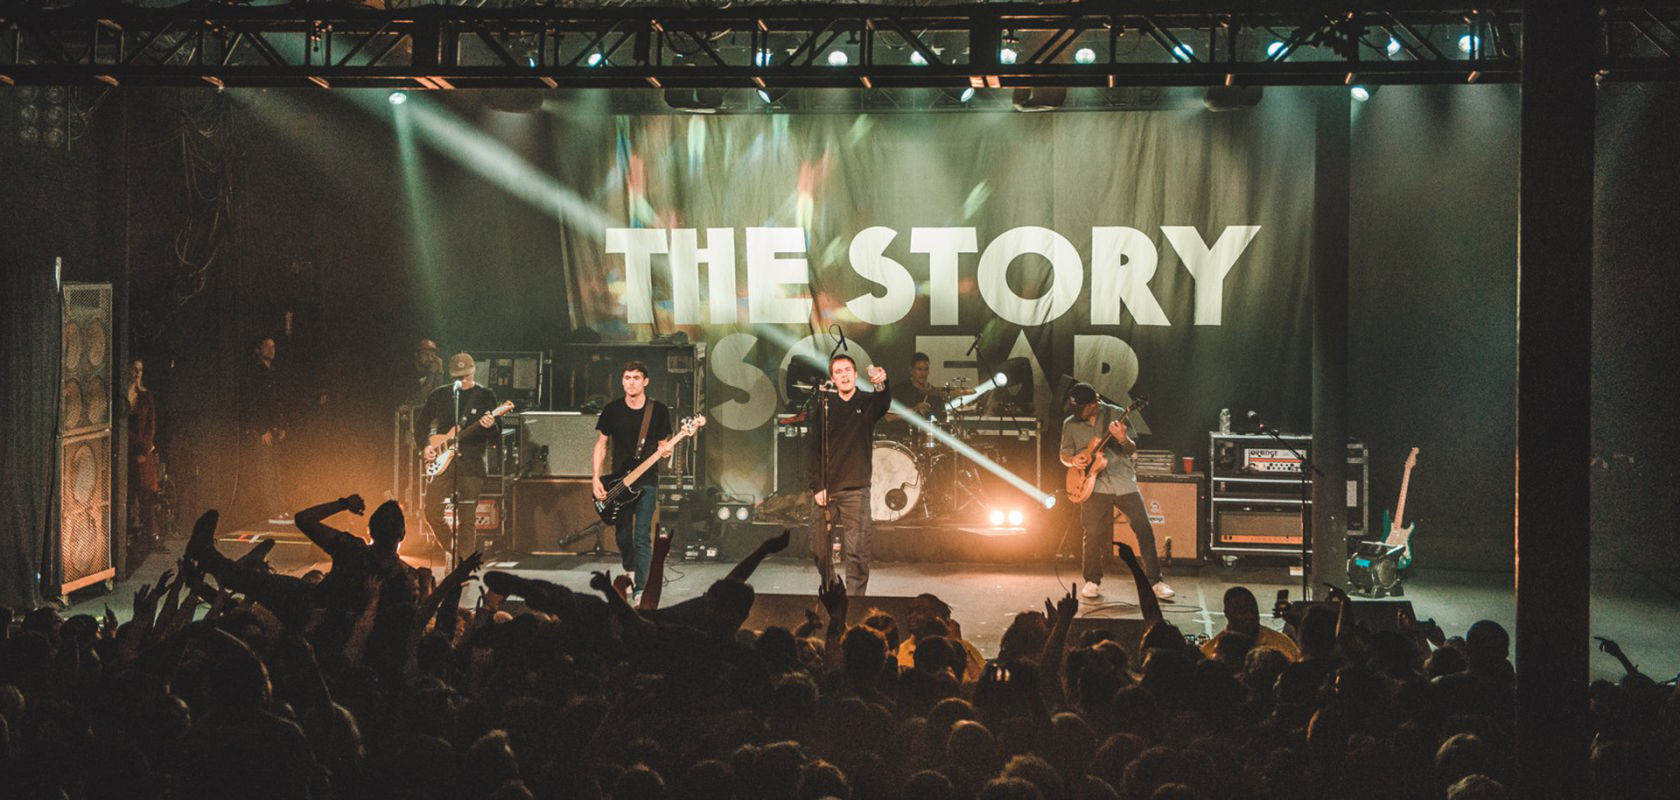 The Story So Far Basement To Co Headline At The Roundhouse In 2019 Roundhouse